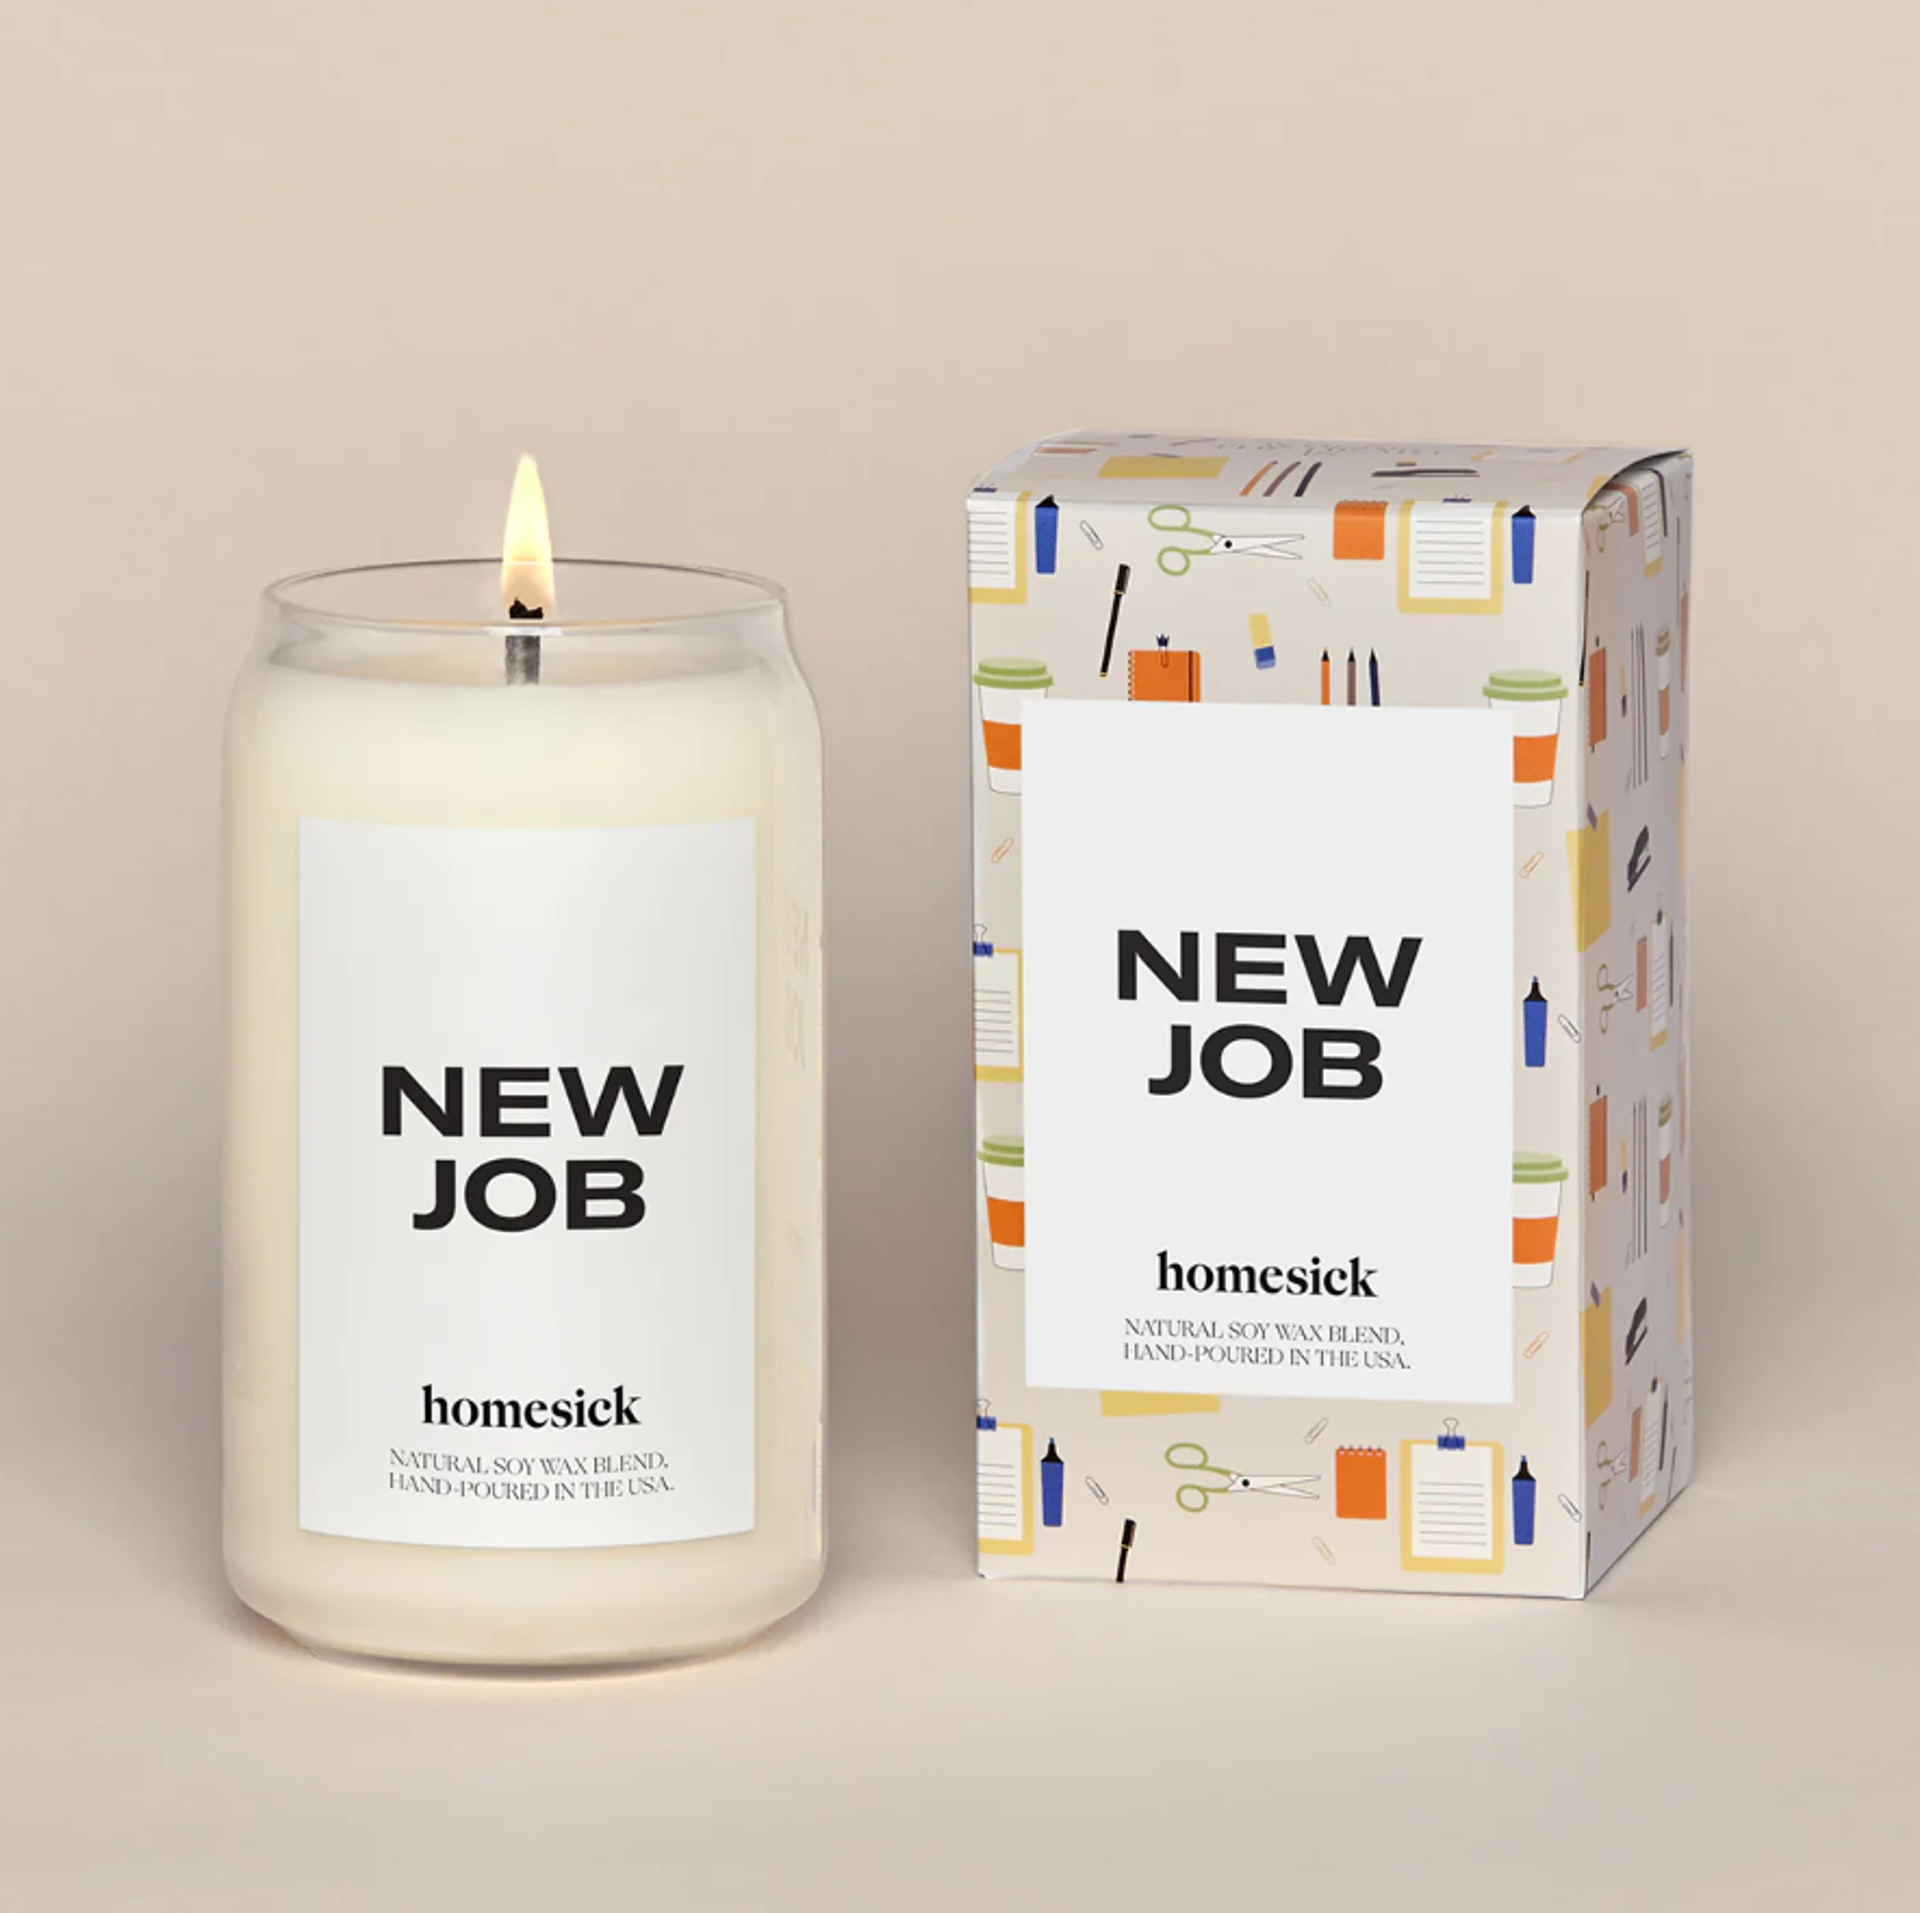 New Job Candle by Chauvet Arts